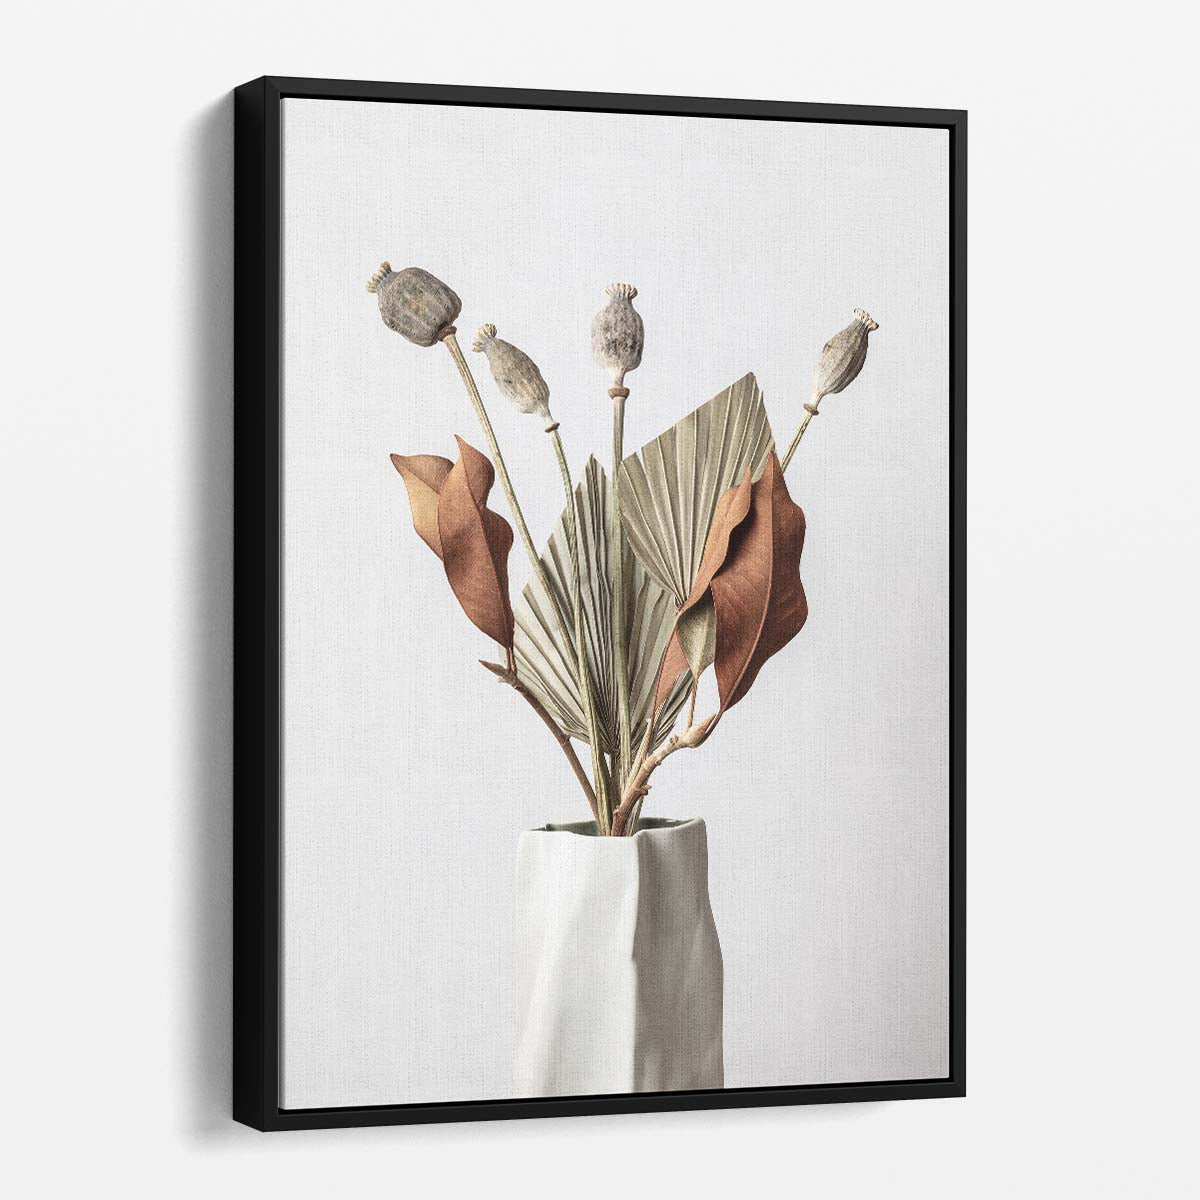 Minimalistic Still Life Photography of Dried Floral Botanicals in Studio by Luxuriance Designs, made in USA